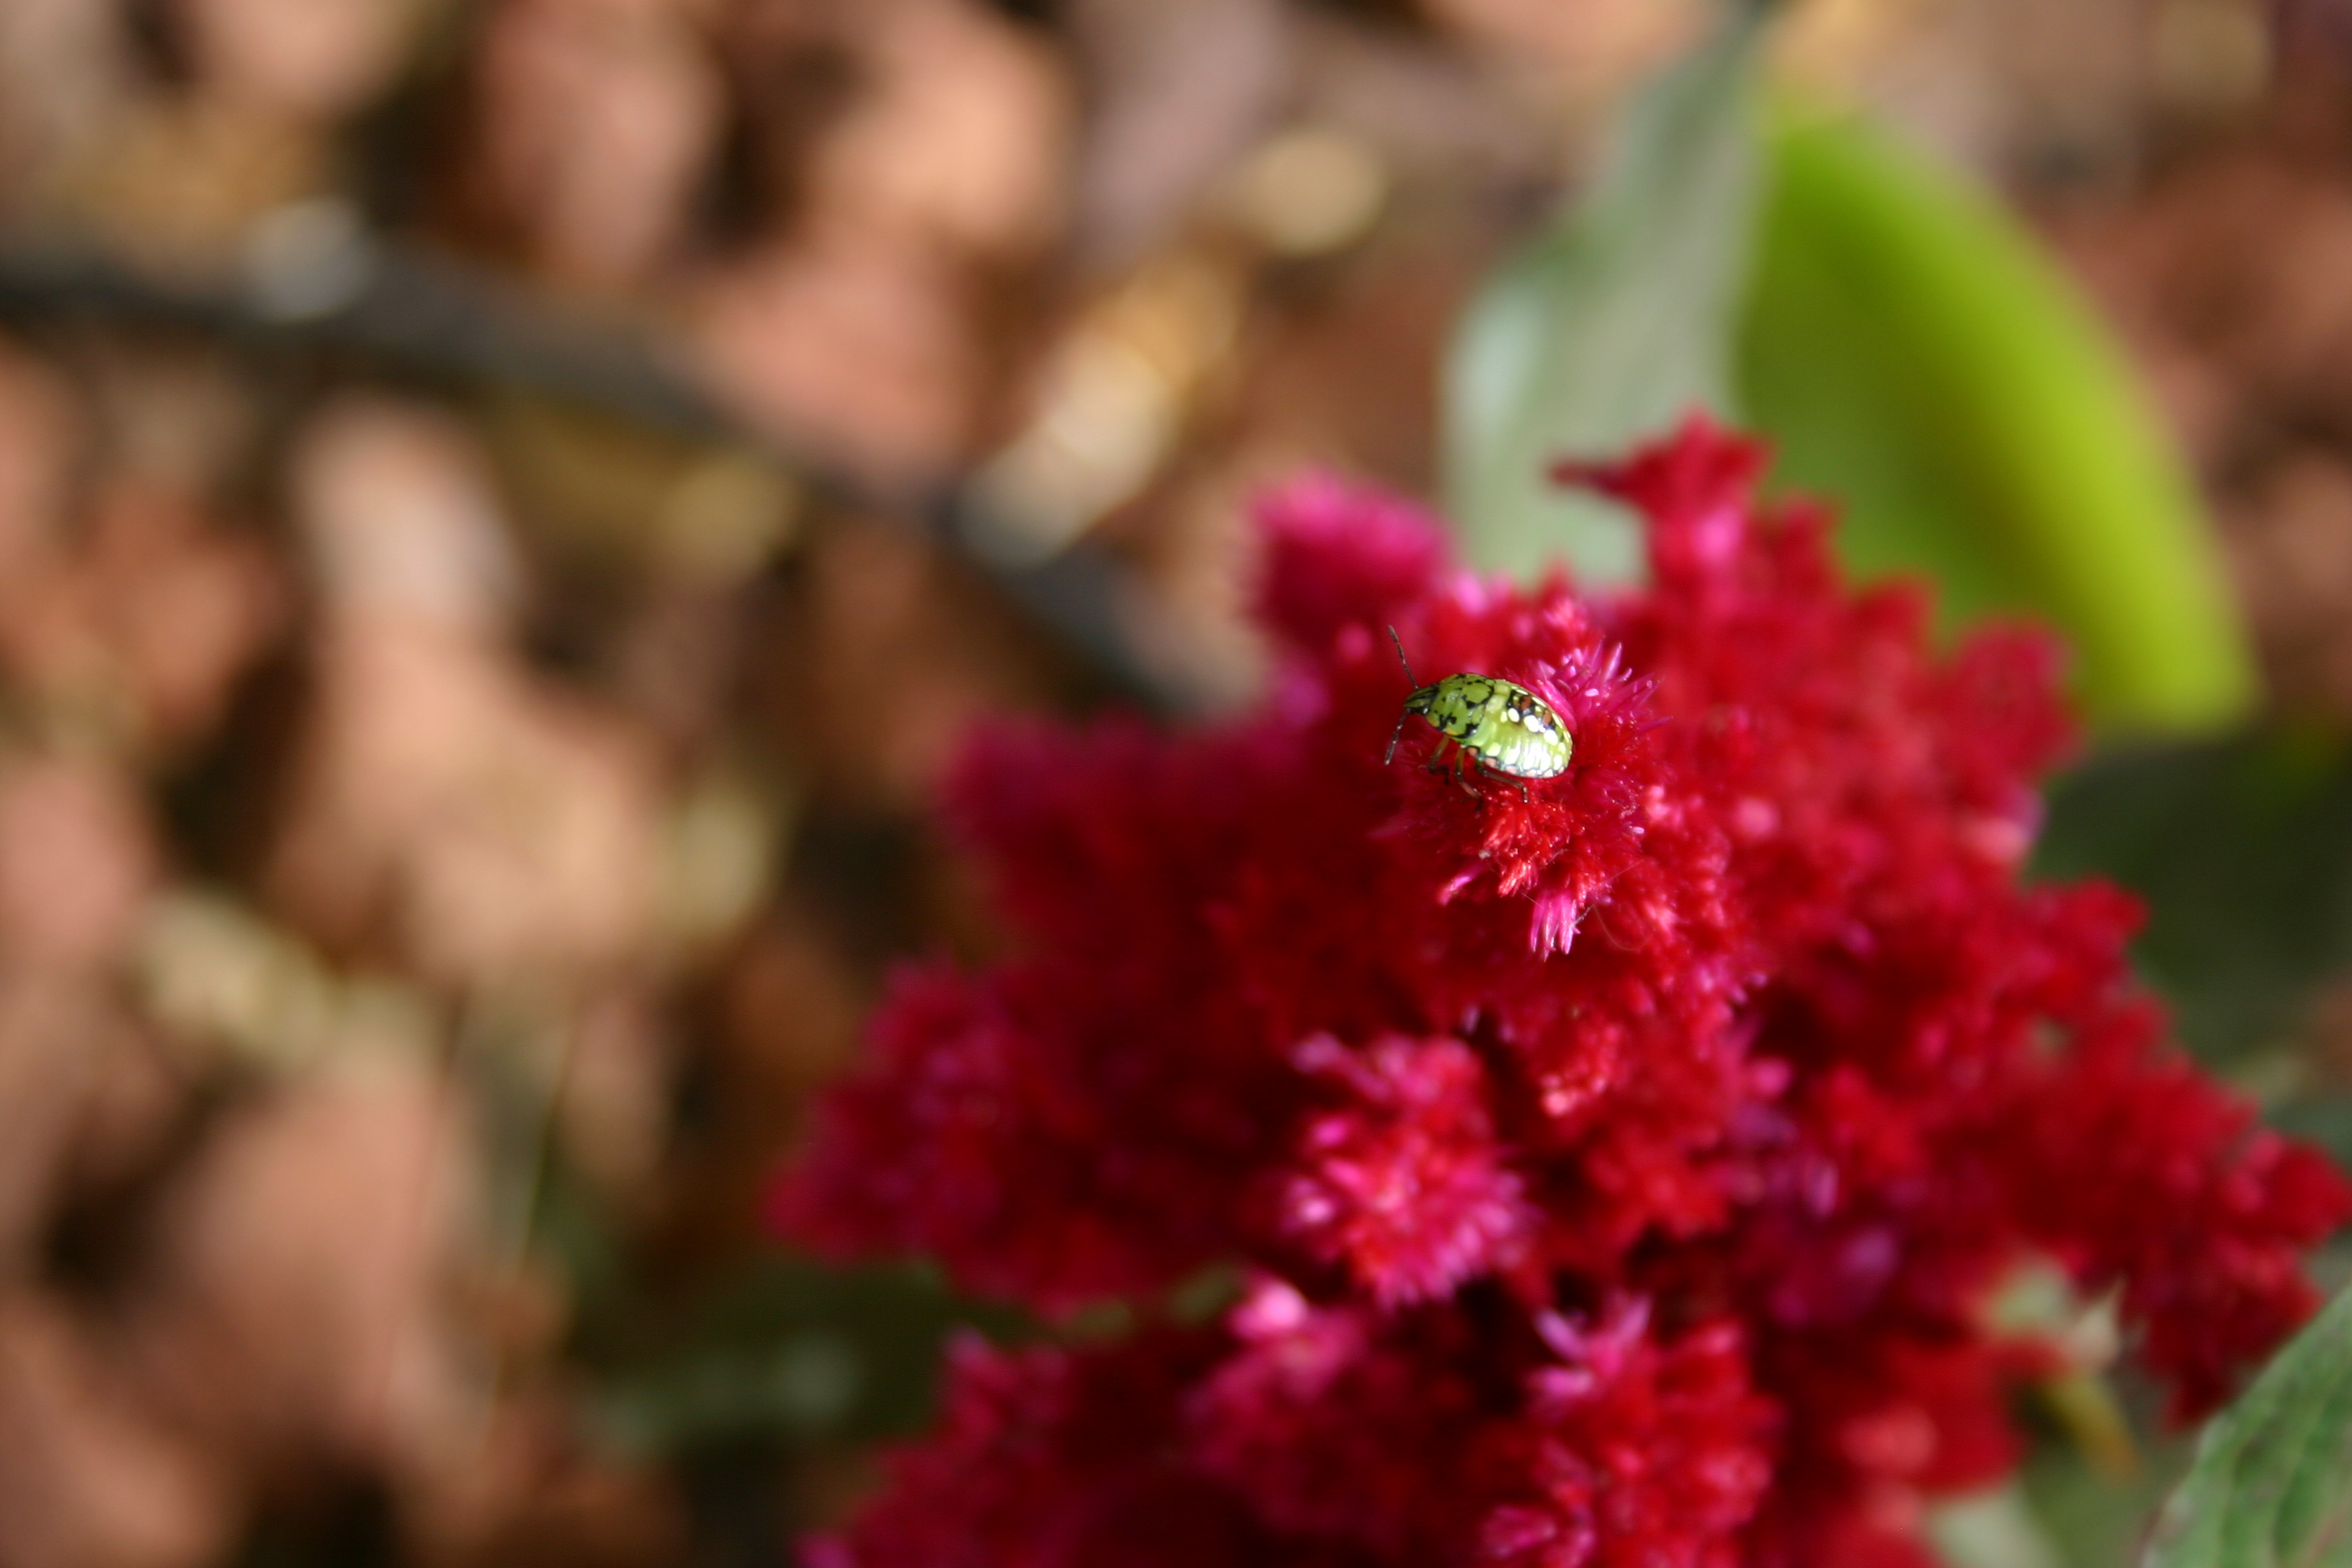 A green, red, and black spotted bug on a Celosia flower.  (If you know the species, please let me know and I'll add the info!  Maybe some kind of shield beetle?) 